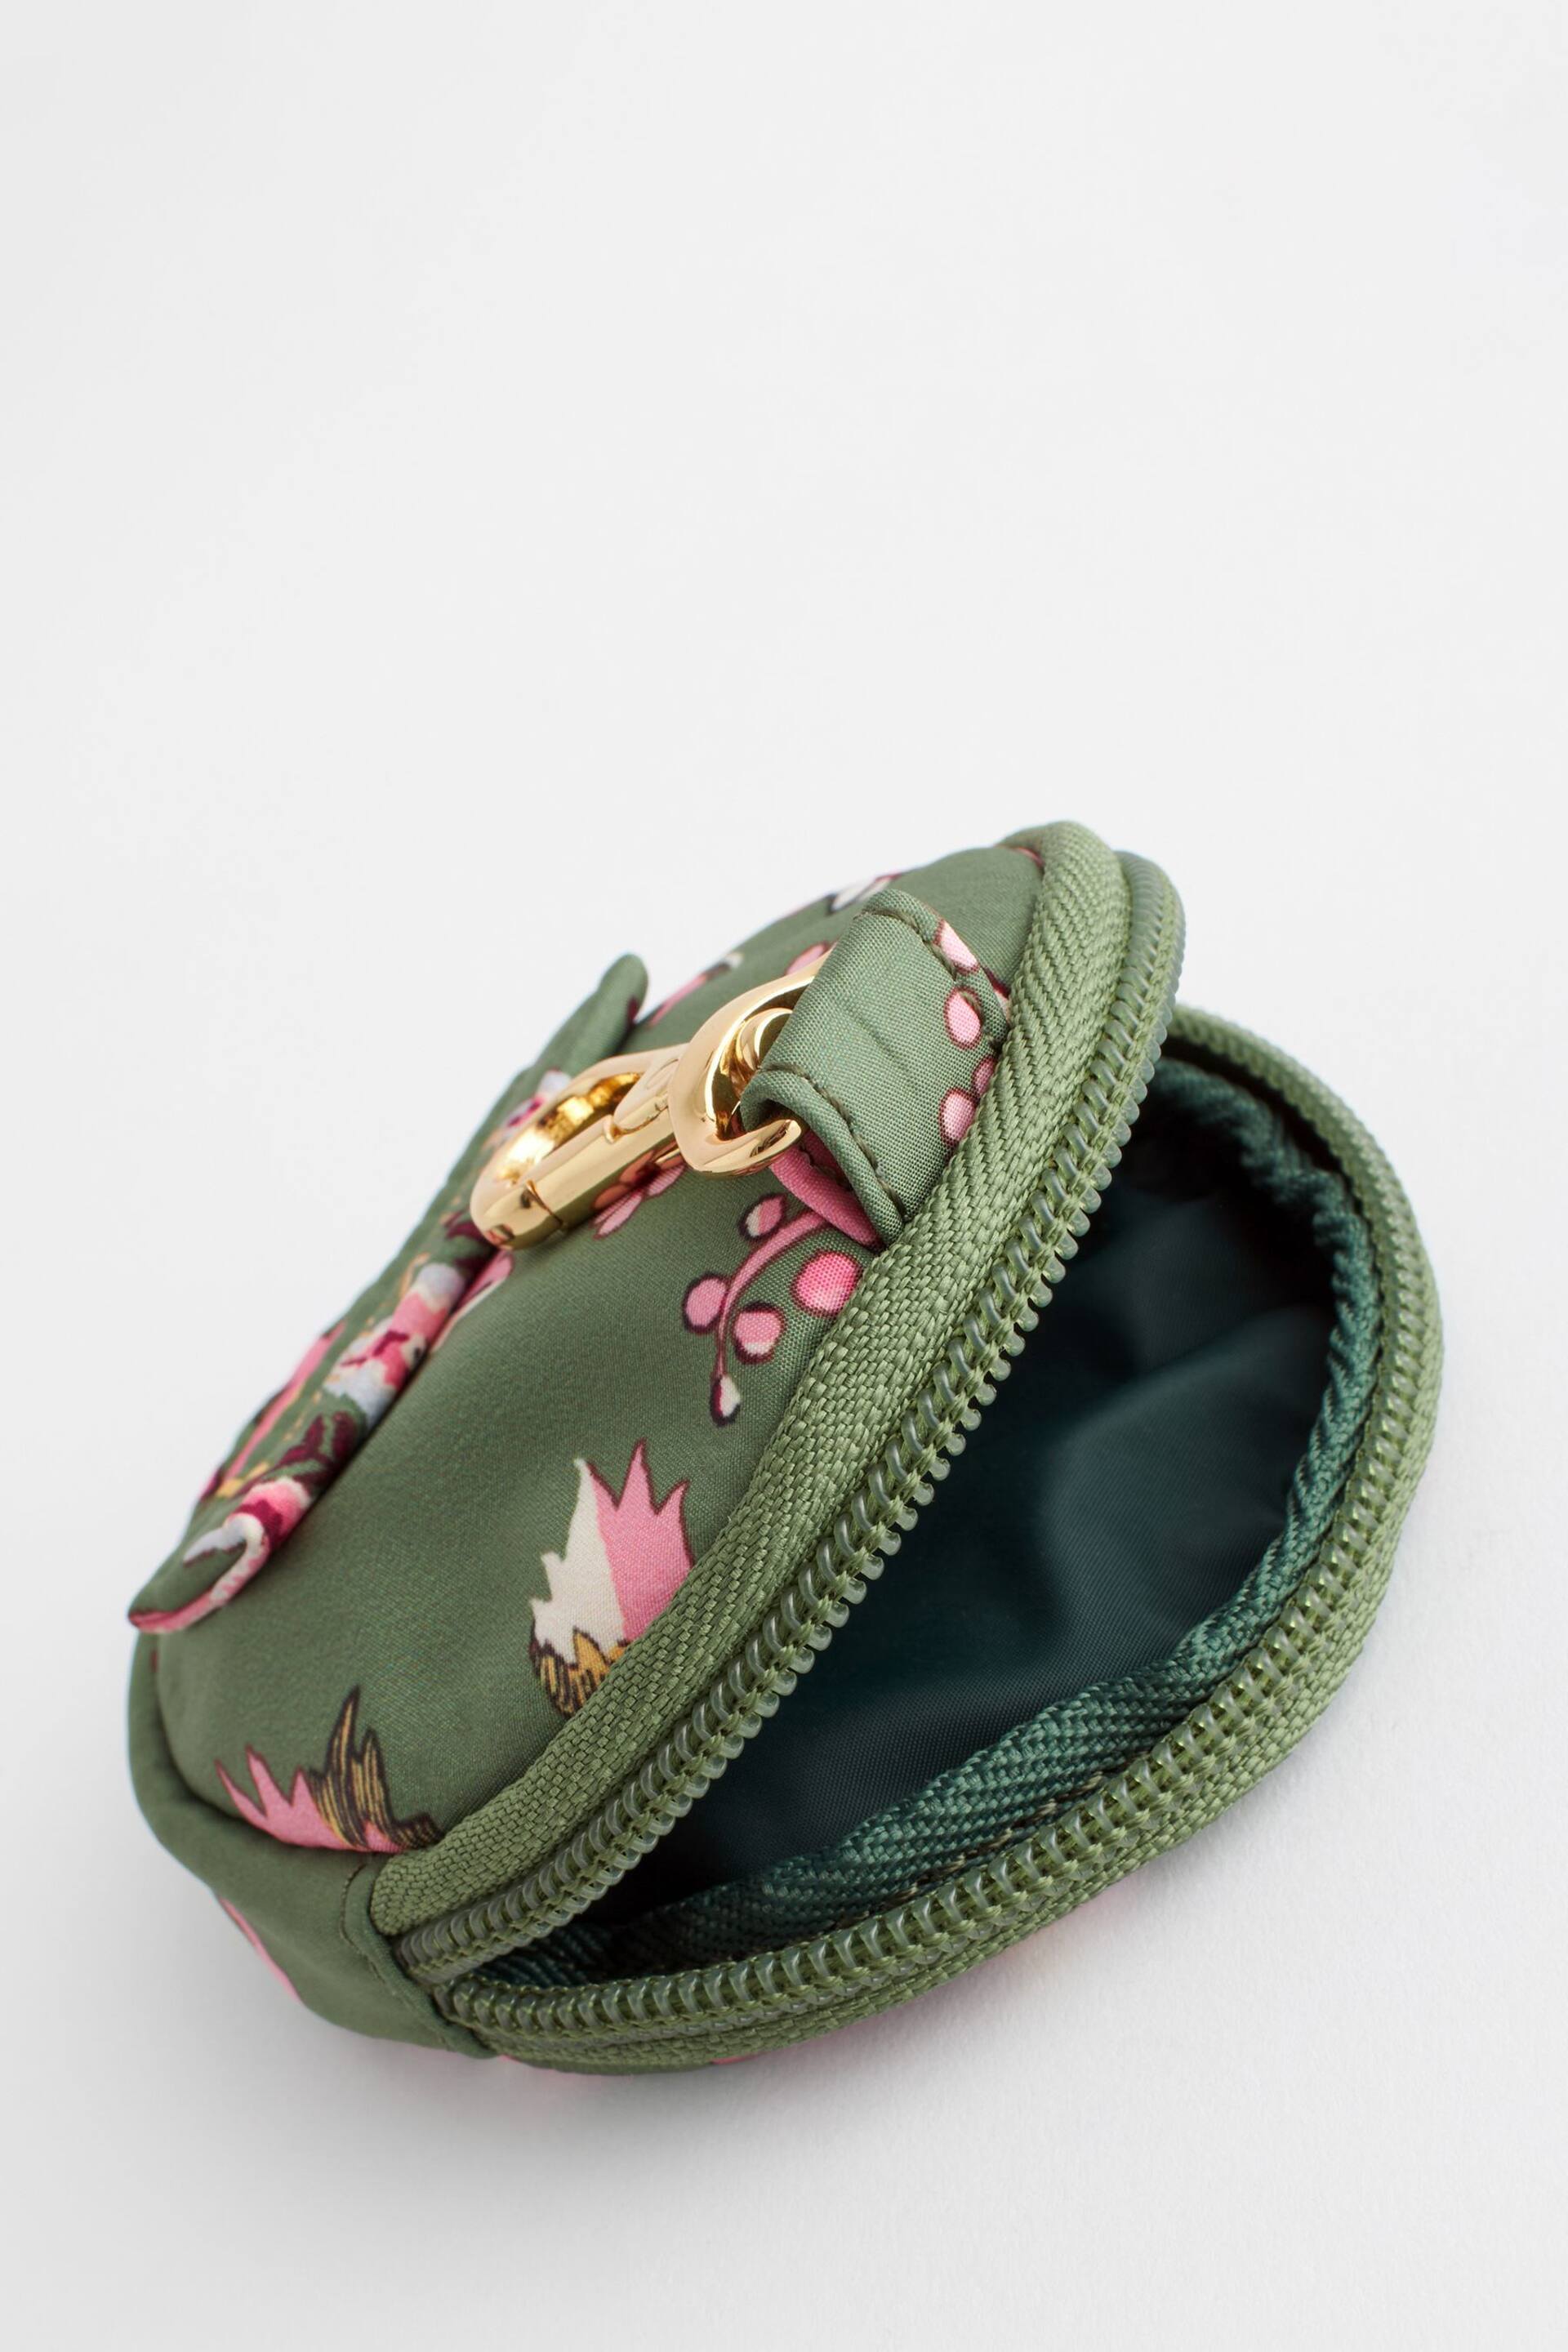 Cath Kidston Green Floral Round Coin Purse - Image 5 of 5